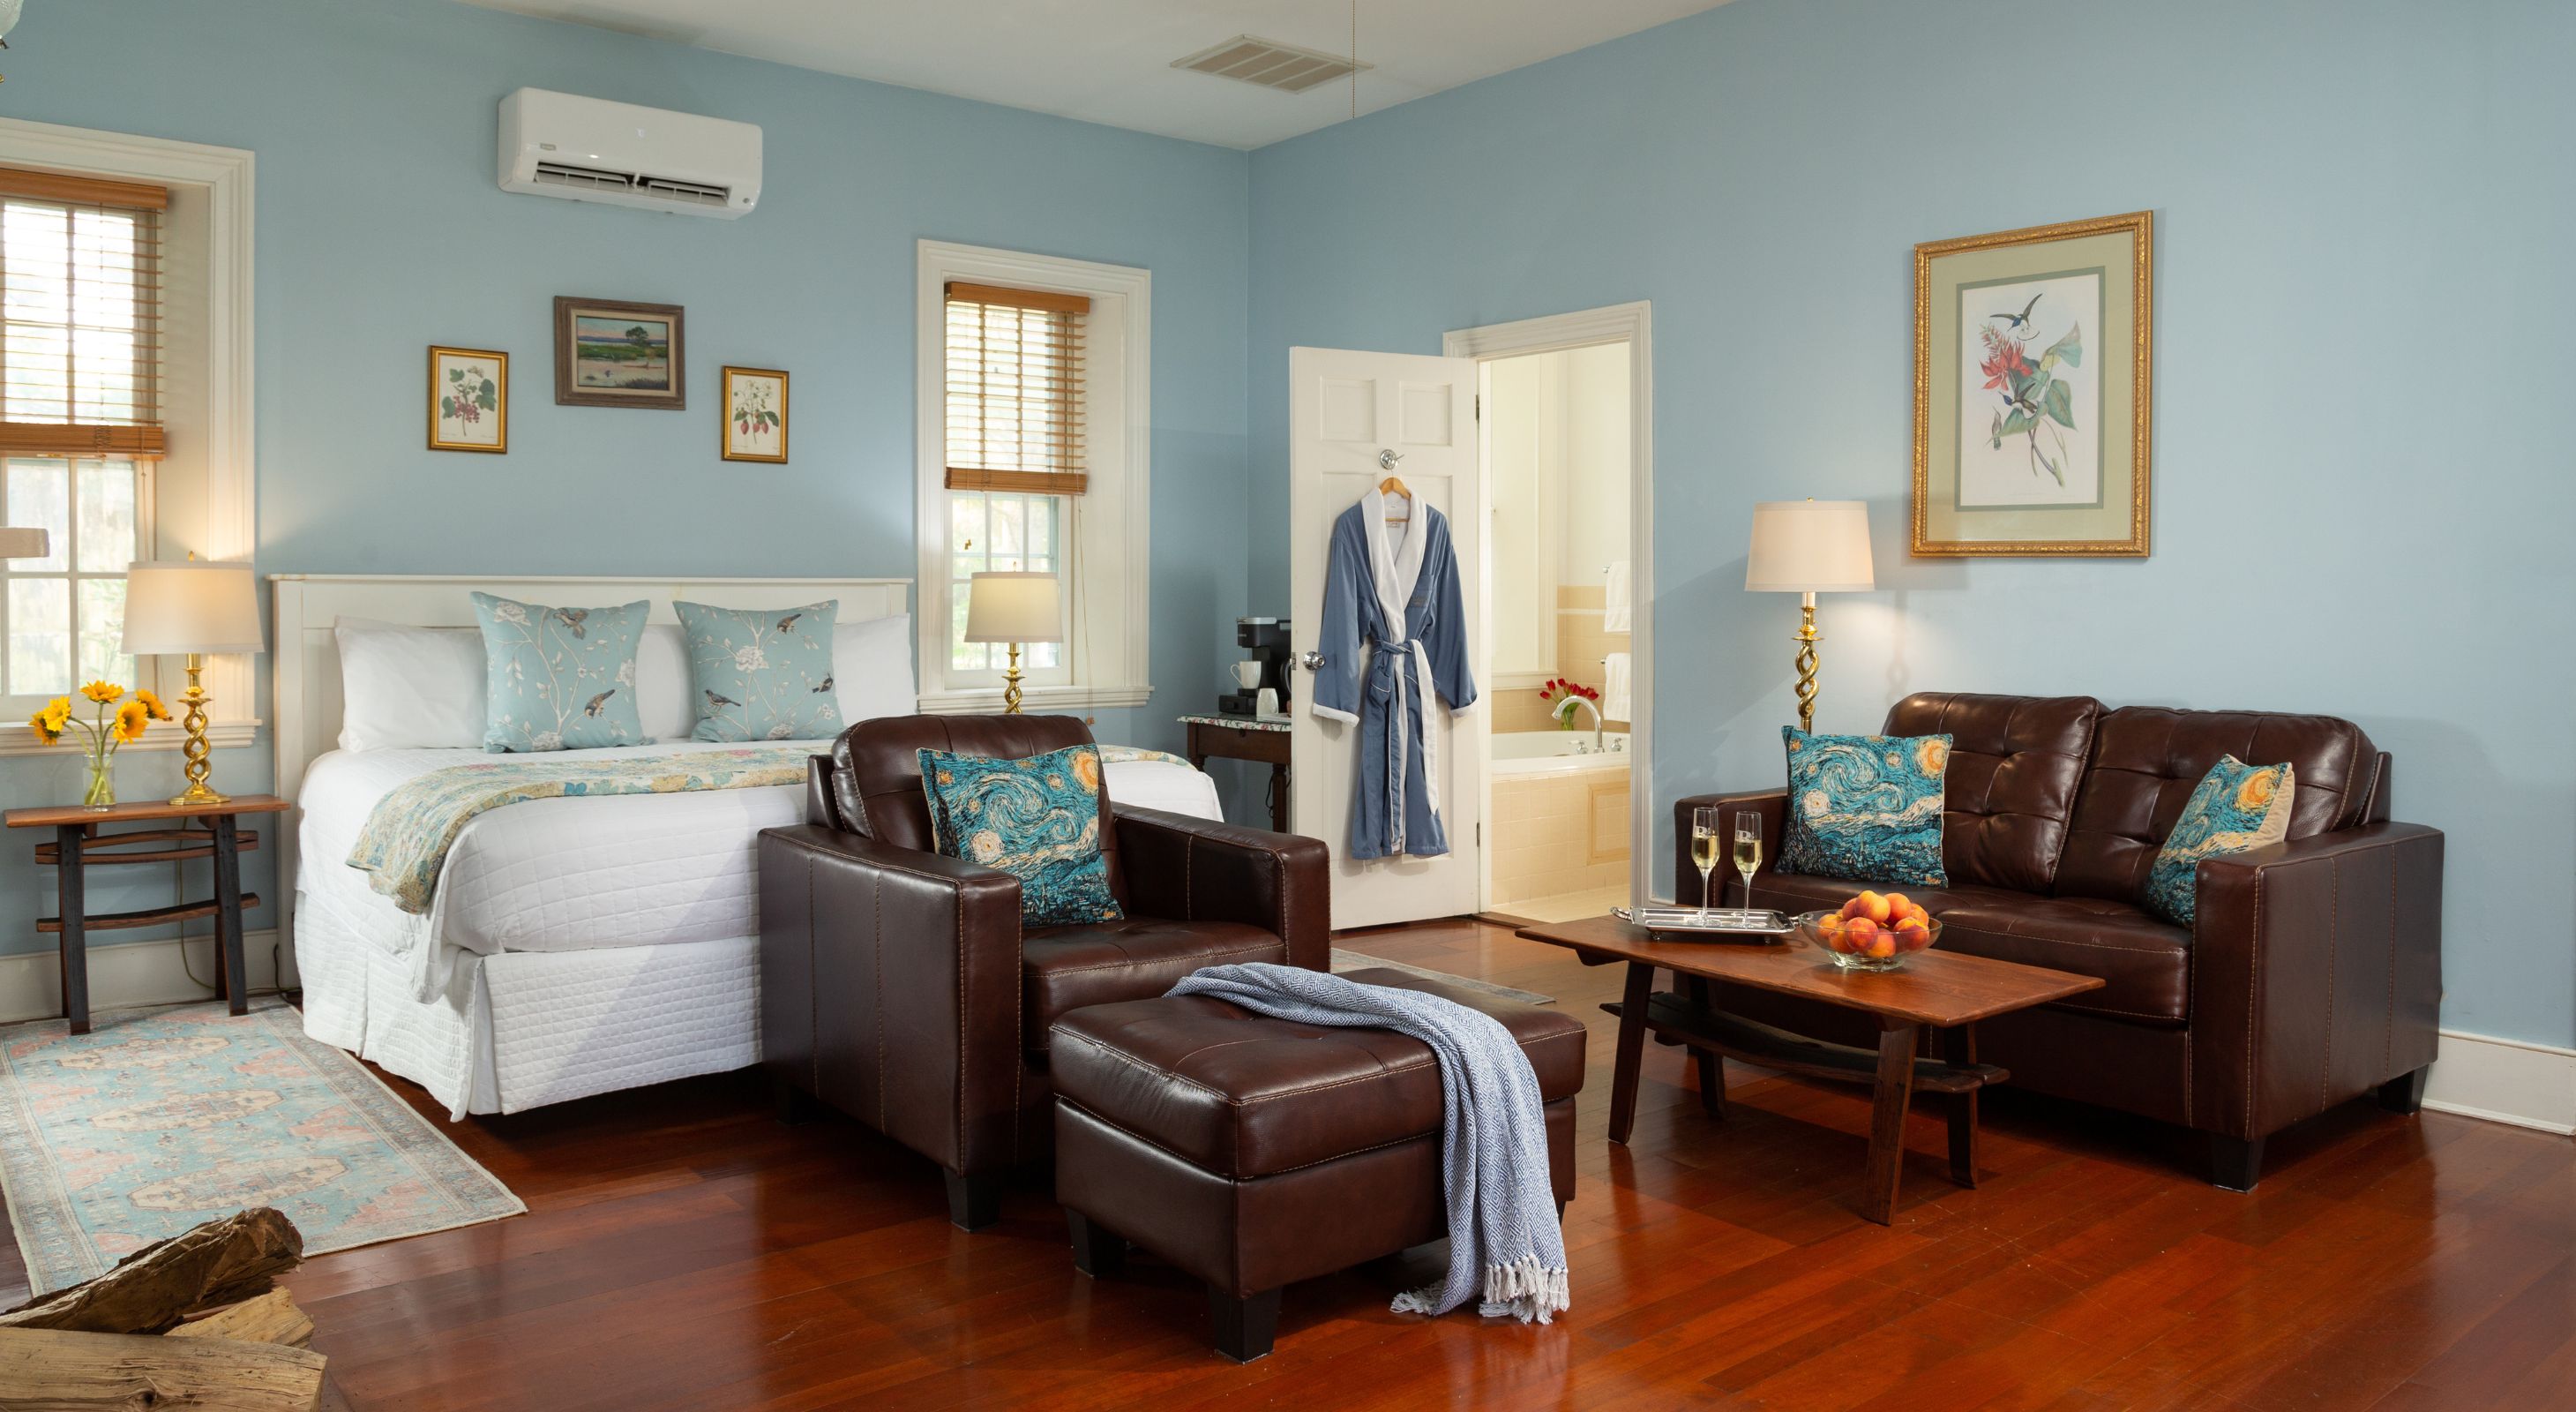 SLight blue Sunrise Room with off-white king bed, windows with blinds, wood floors, and leather sitting area.